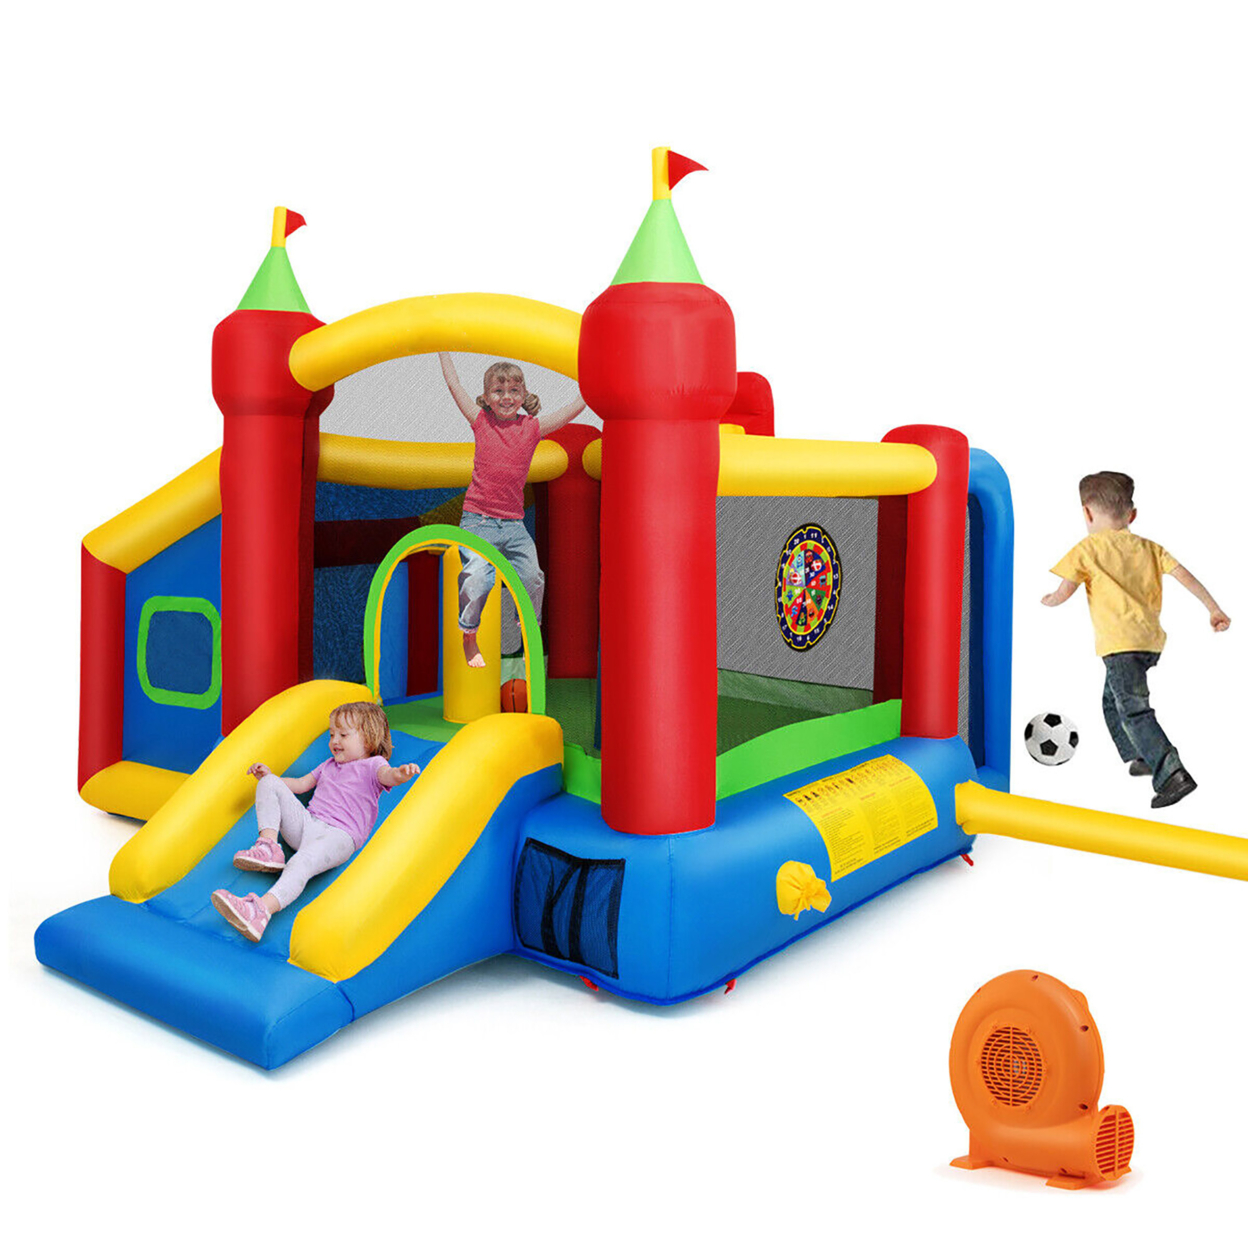 Kids Inflatable Bounce House Play Slide Jumping Castle Ball Pit With 550W Blower